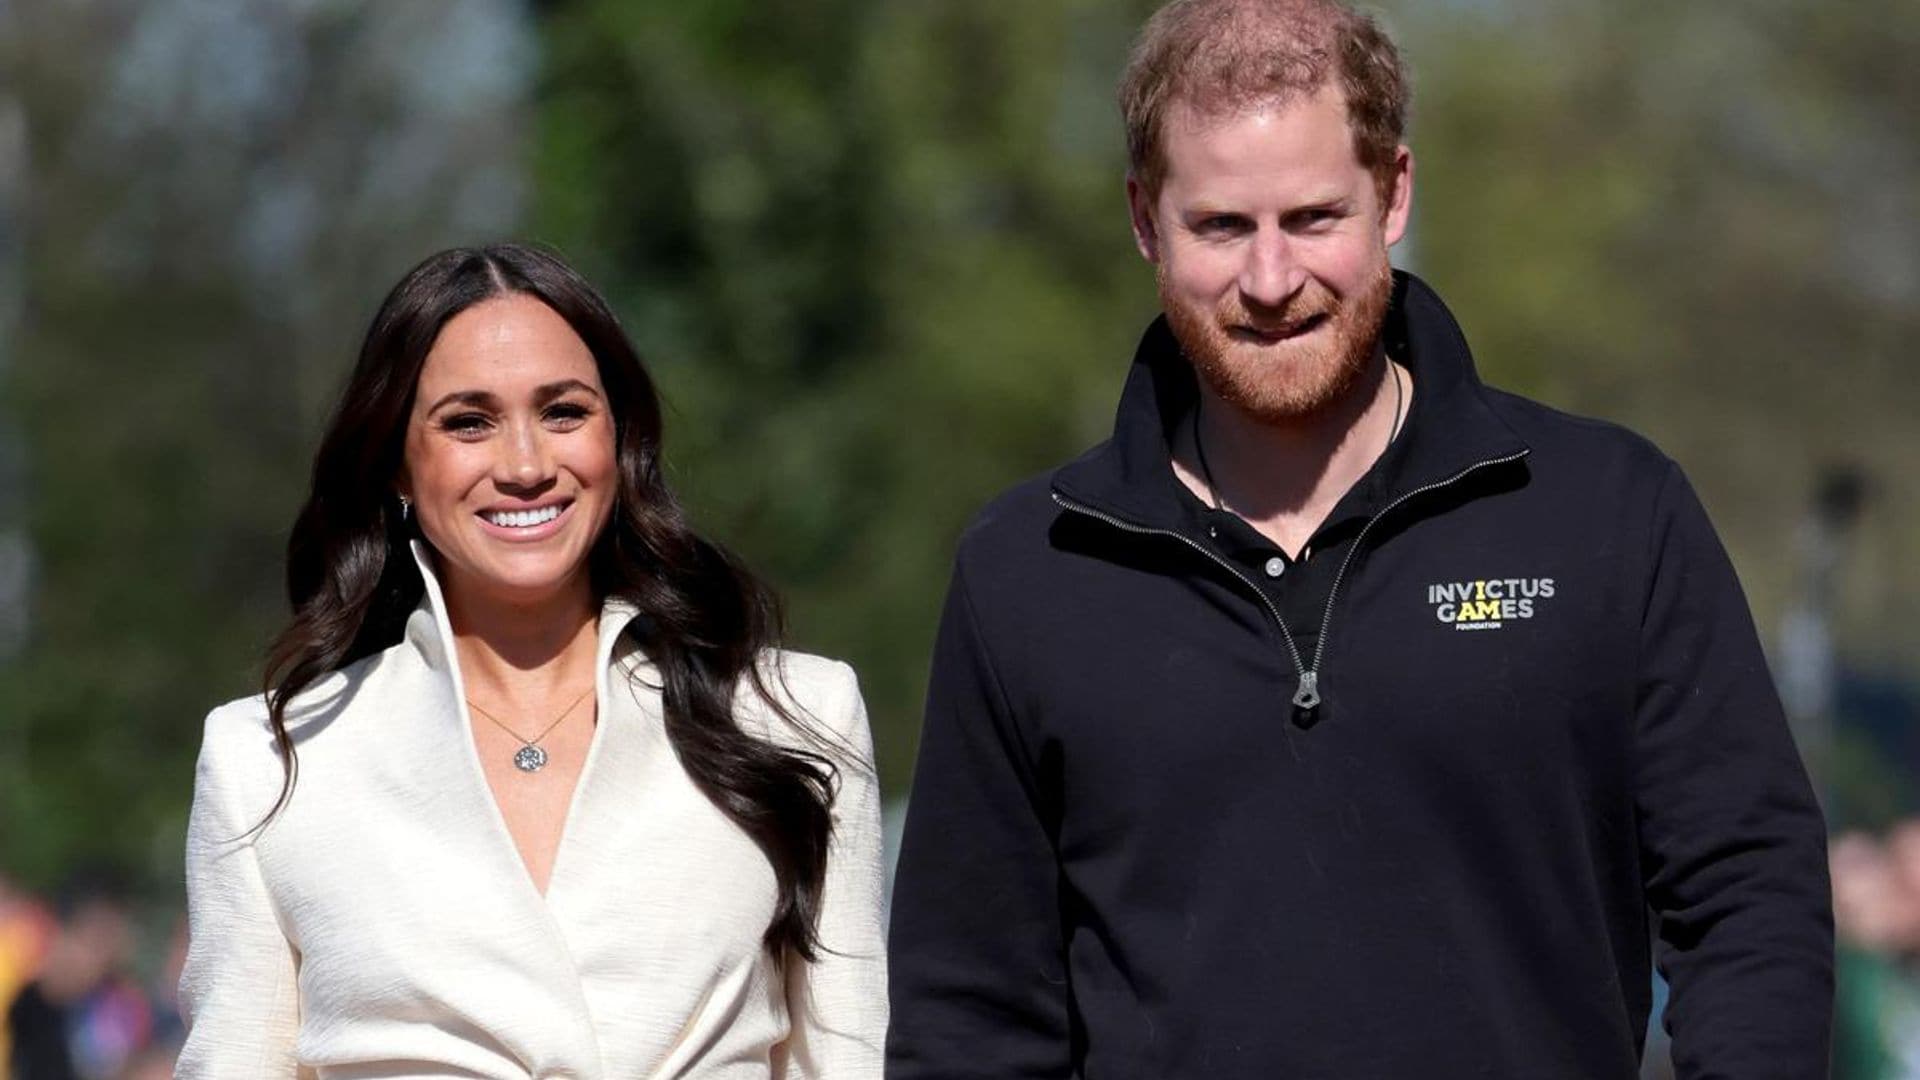 What Meghan Markle and Prince Harry’s son Archie brings his classmates